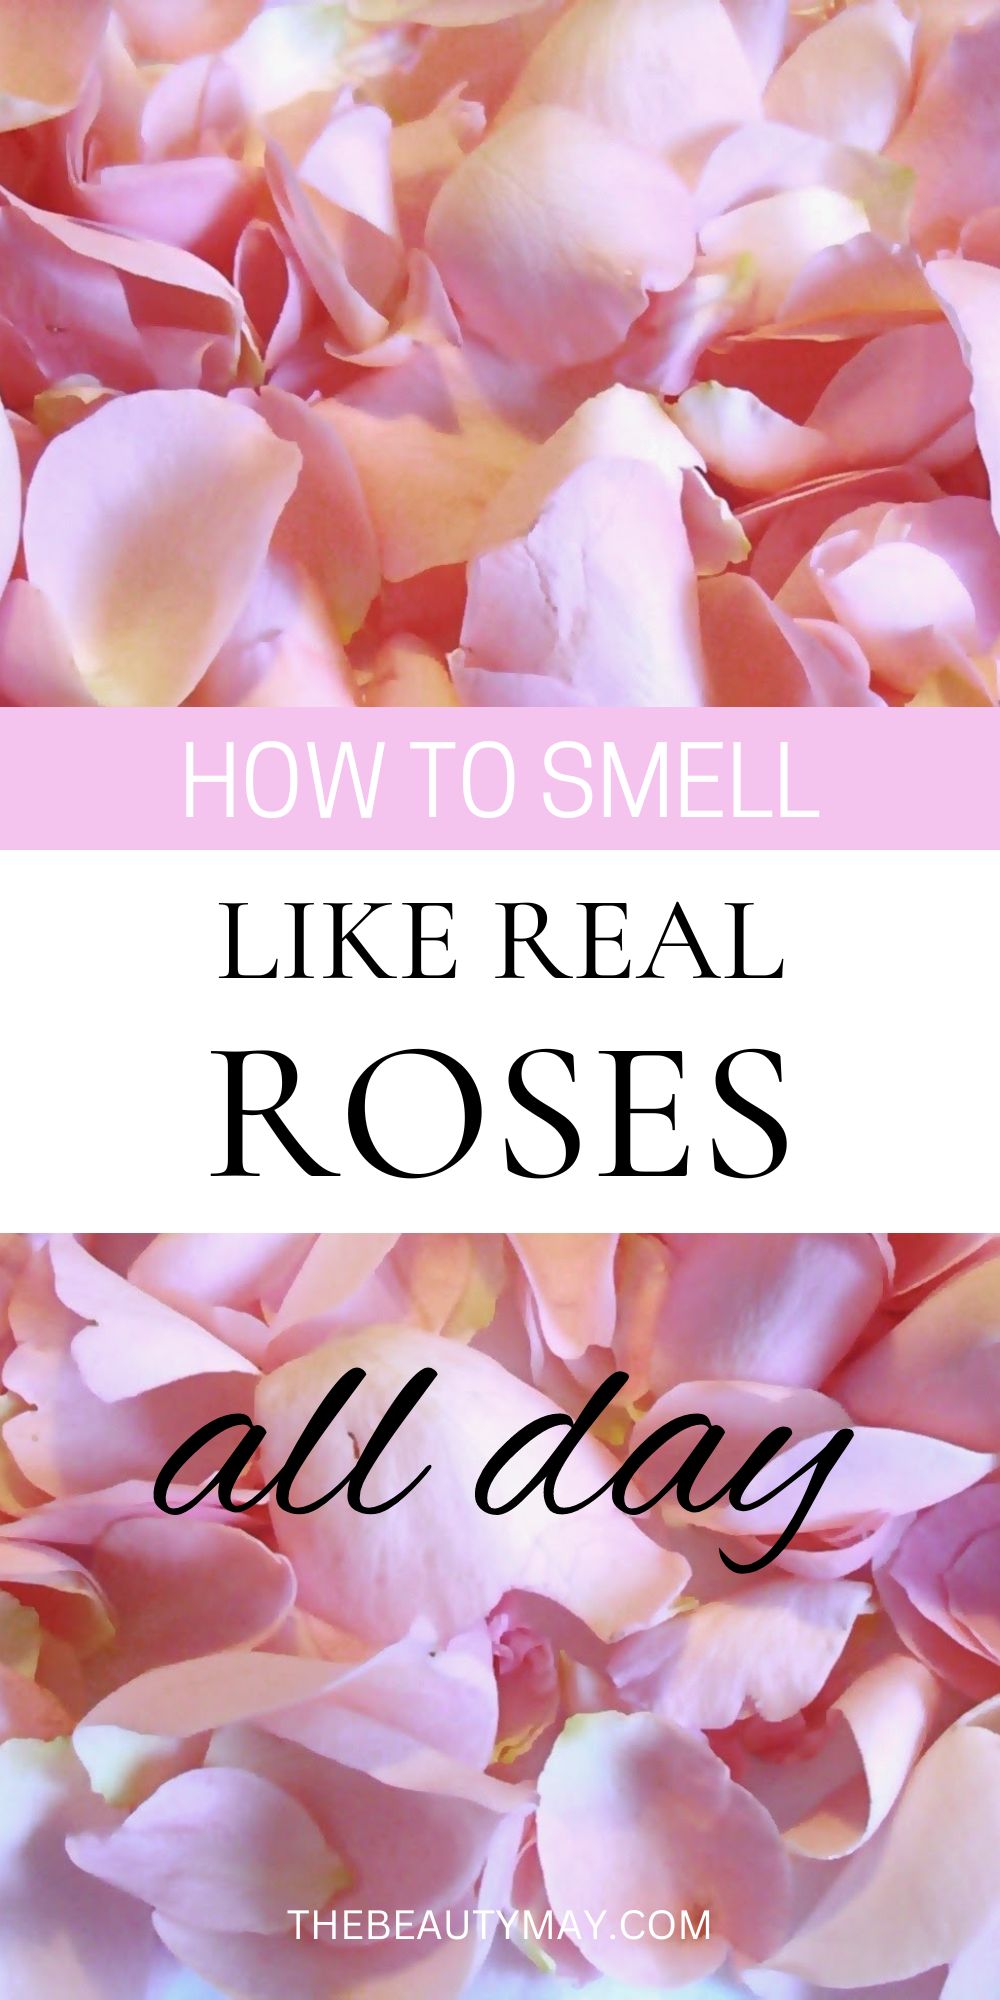 How to smell good all day